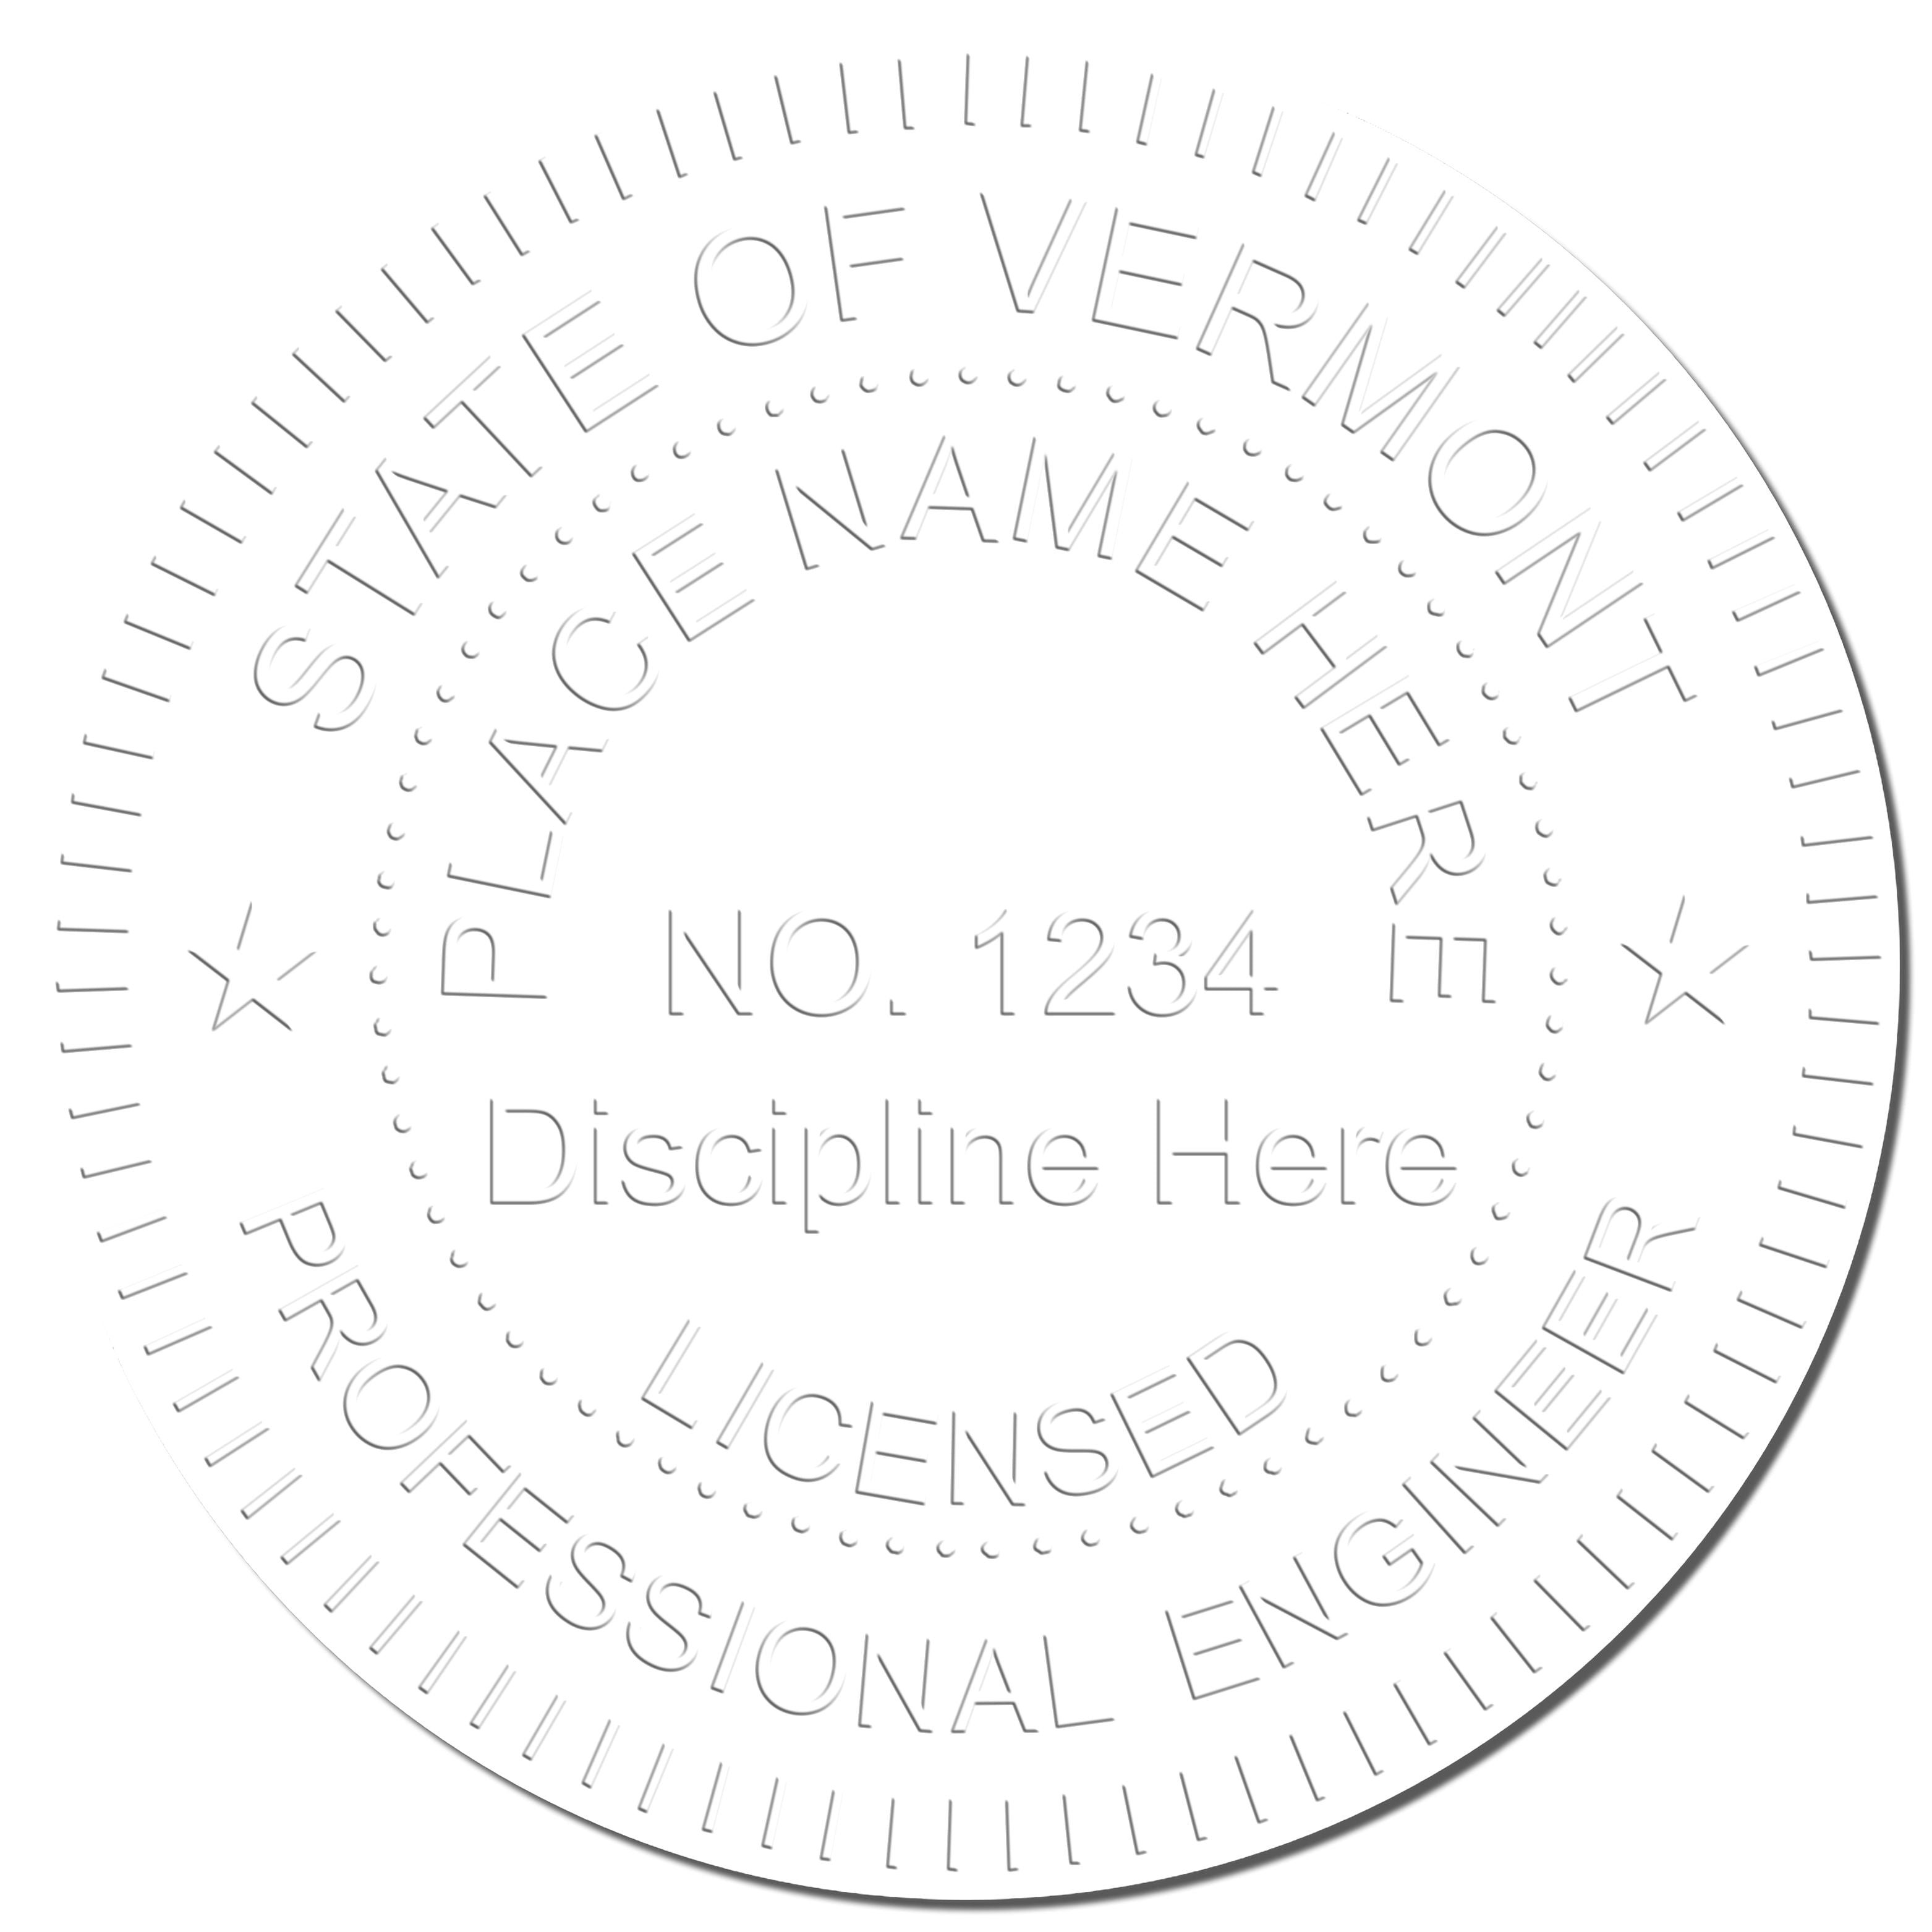 This paper is stamped with a sample imprint of the State of Vermont Extended Long Reach Engineer Seal, signifying its quality and reliability.